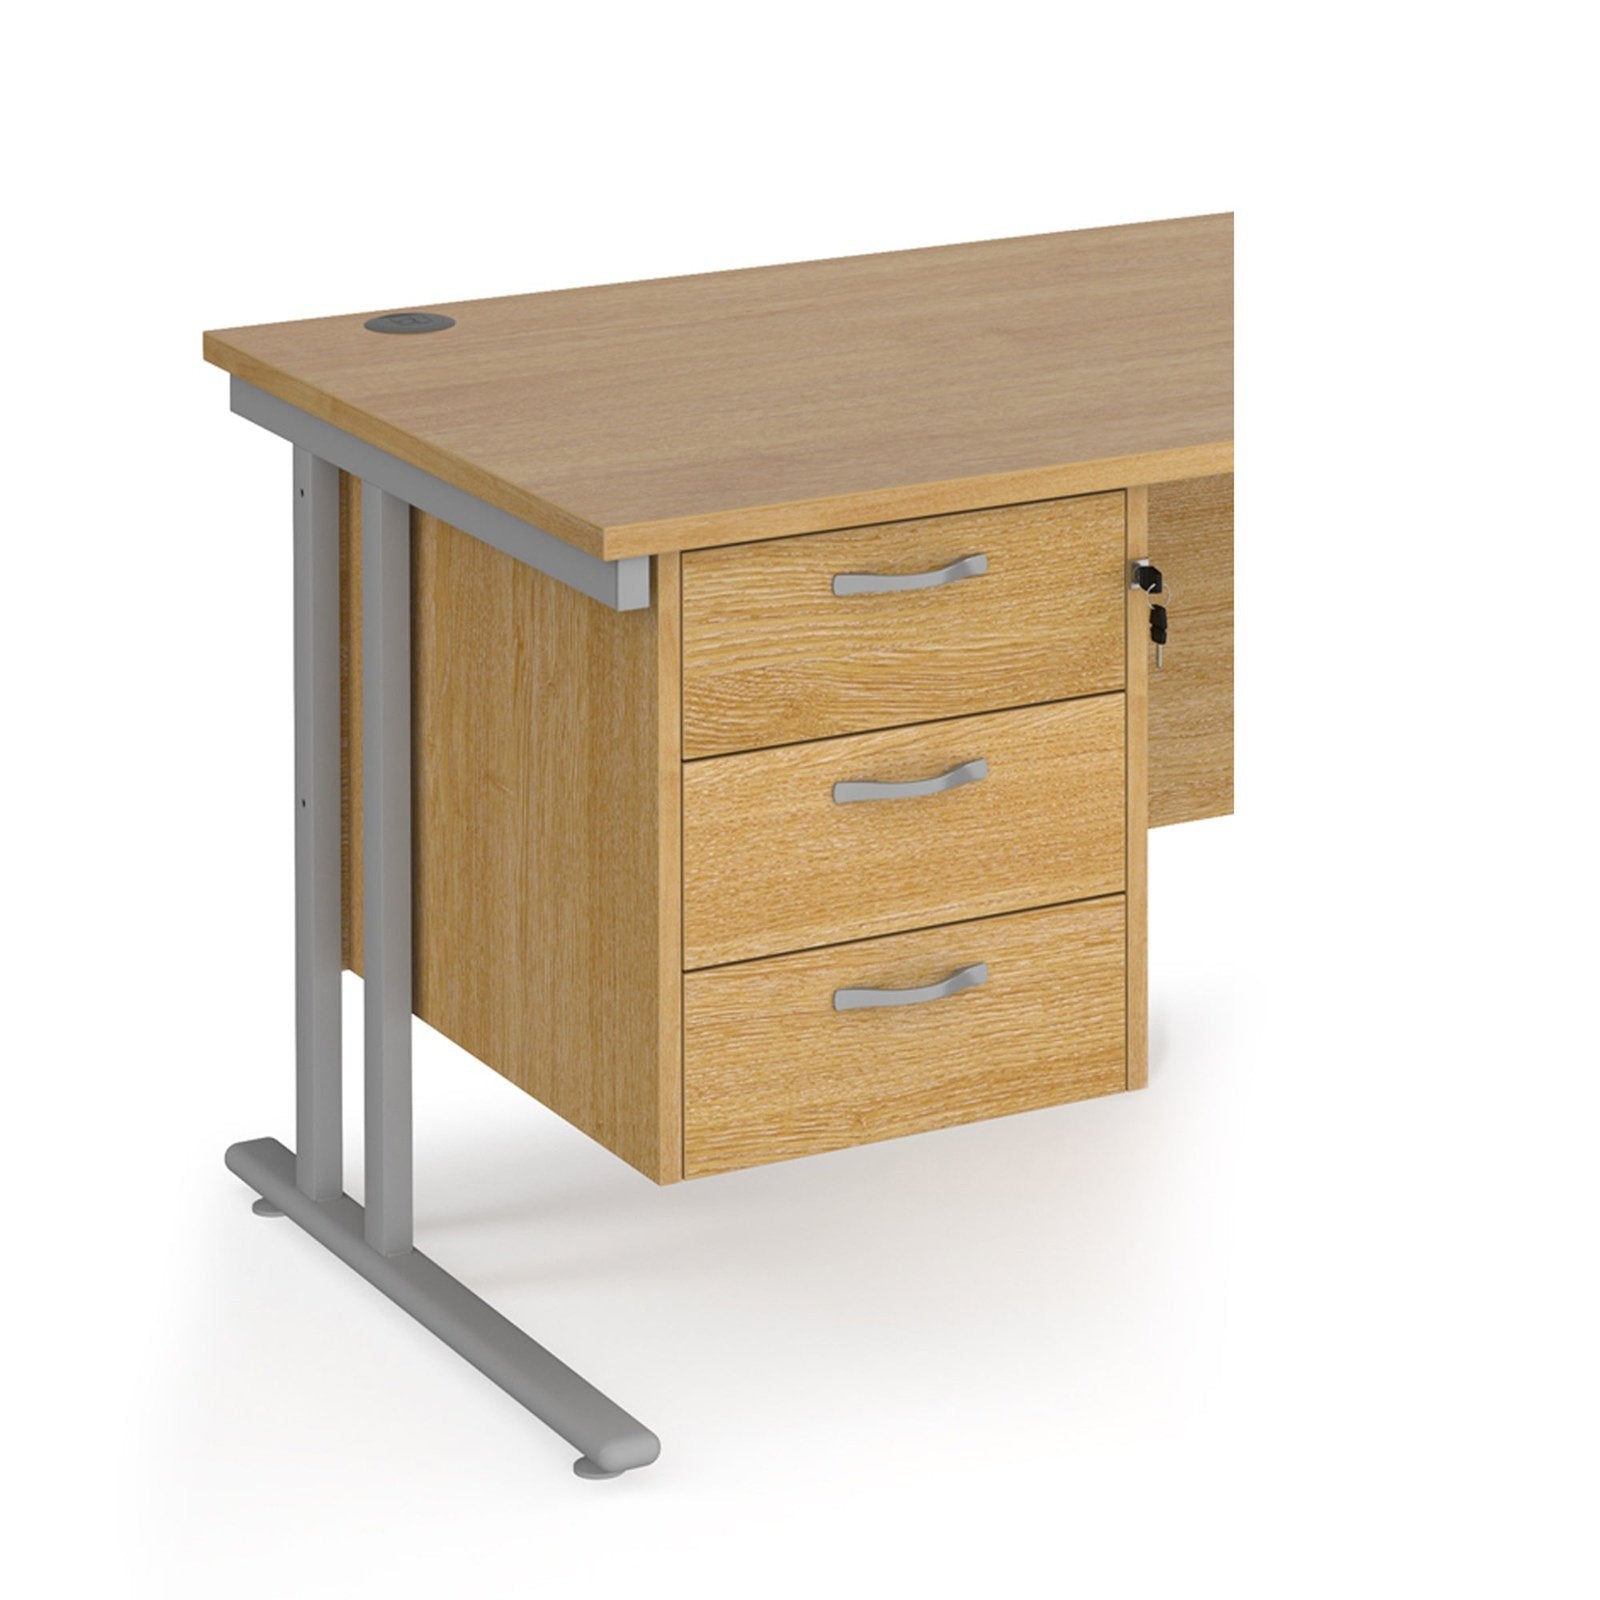 Maestro 25 fixed pedestal - Office Products Online